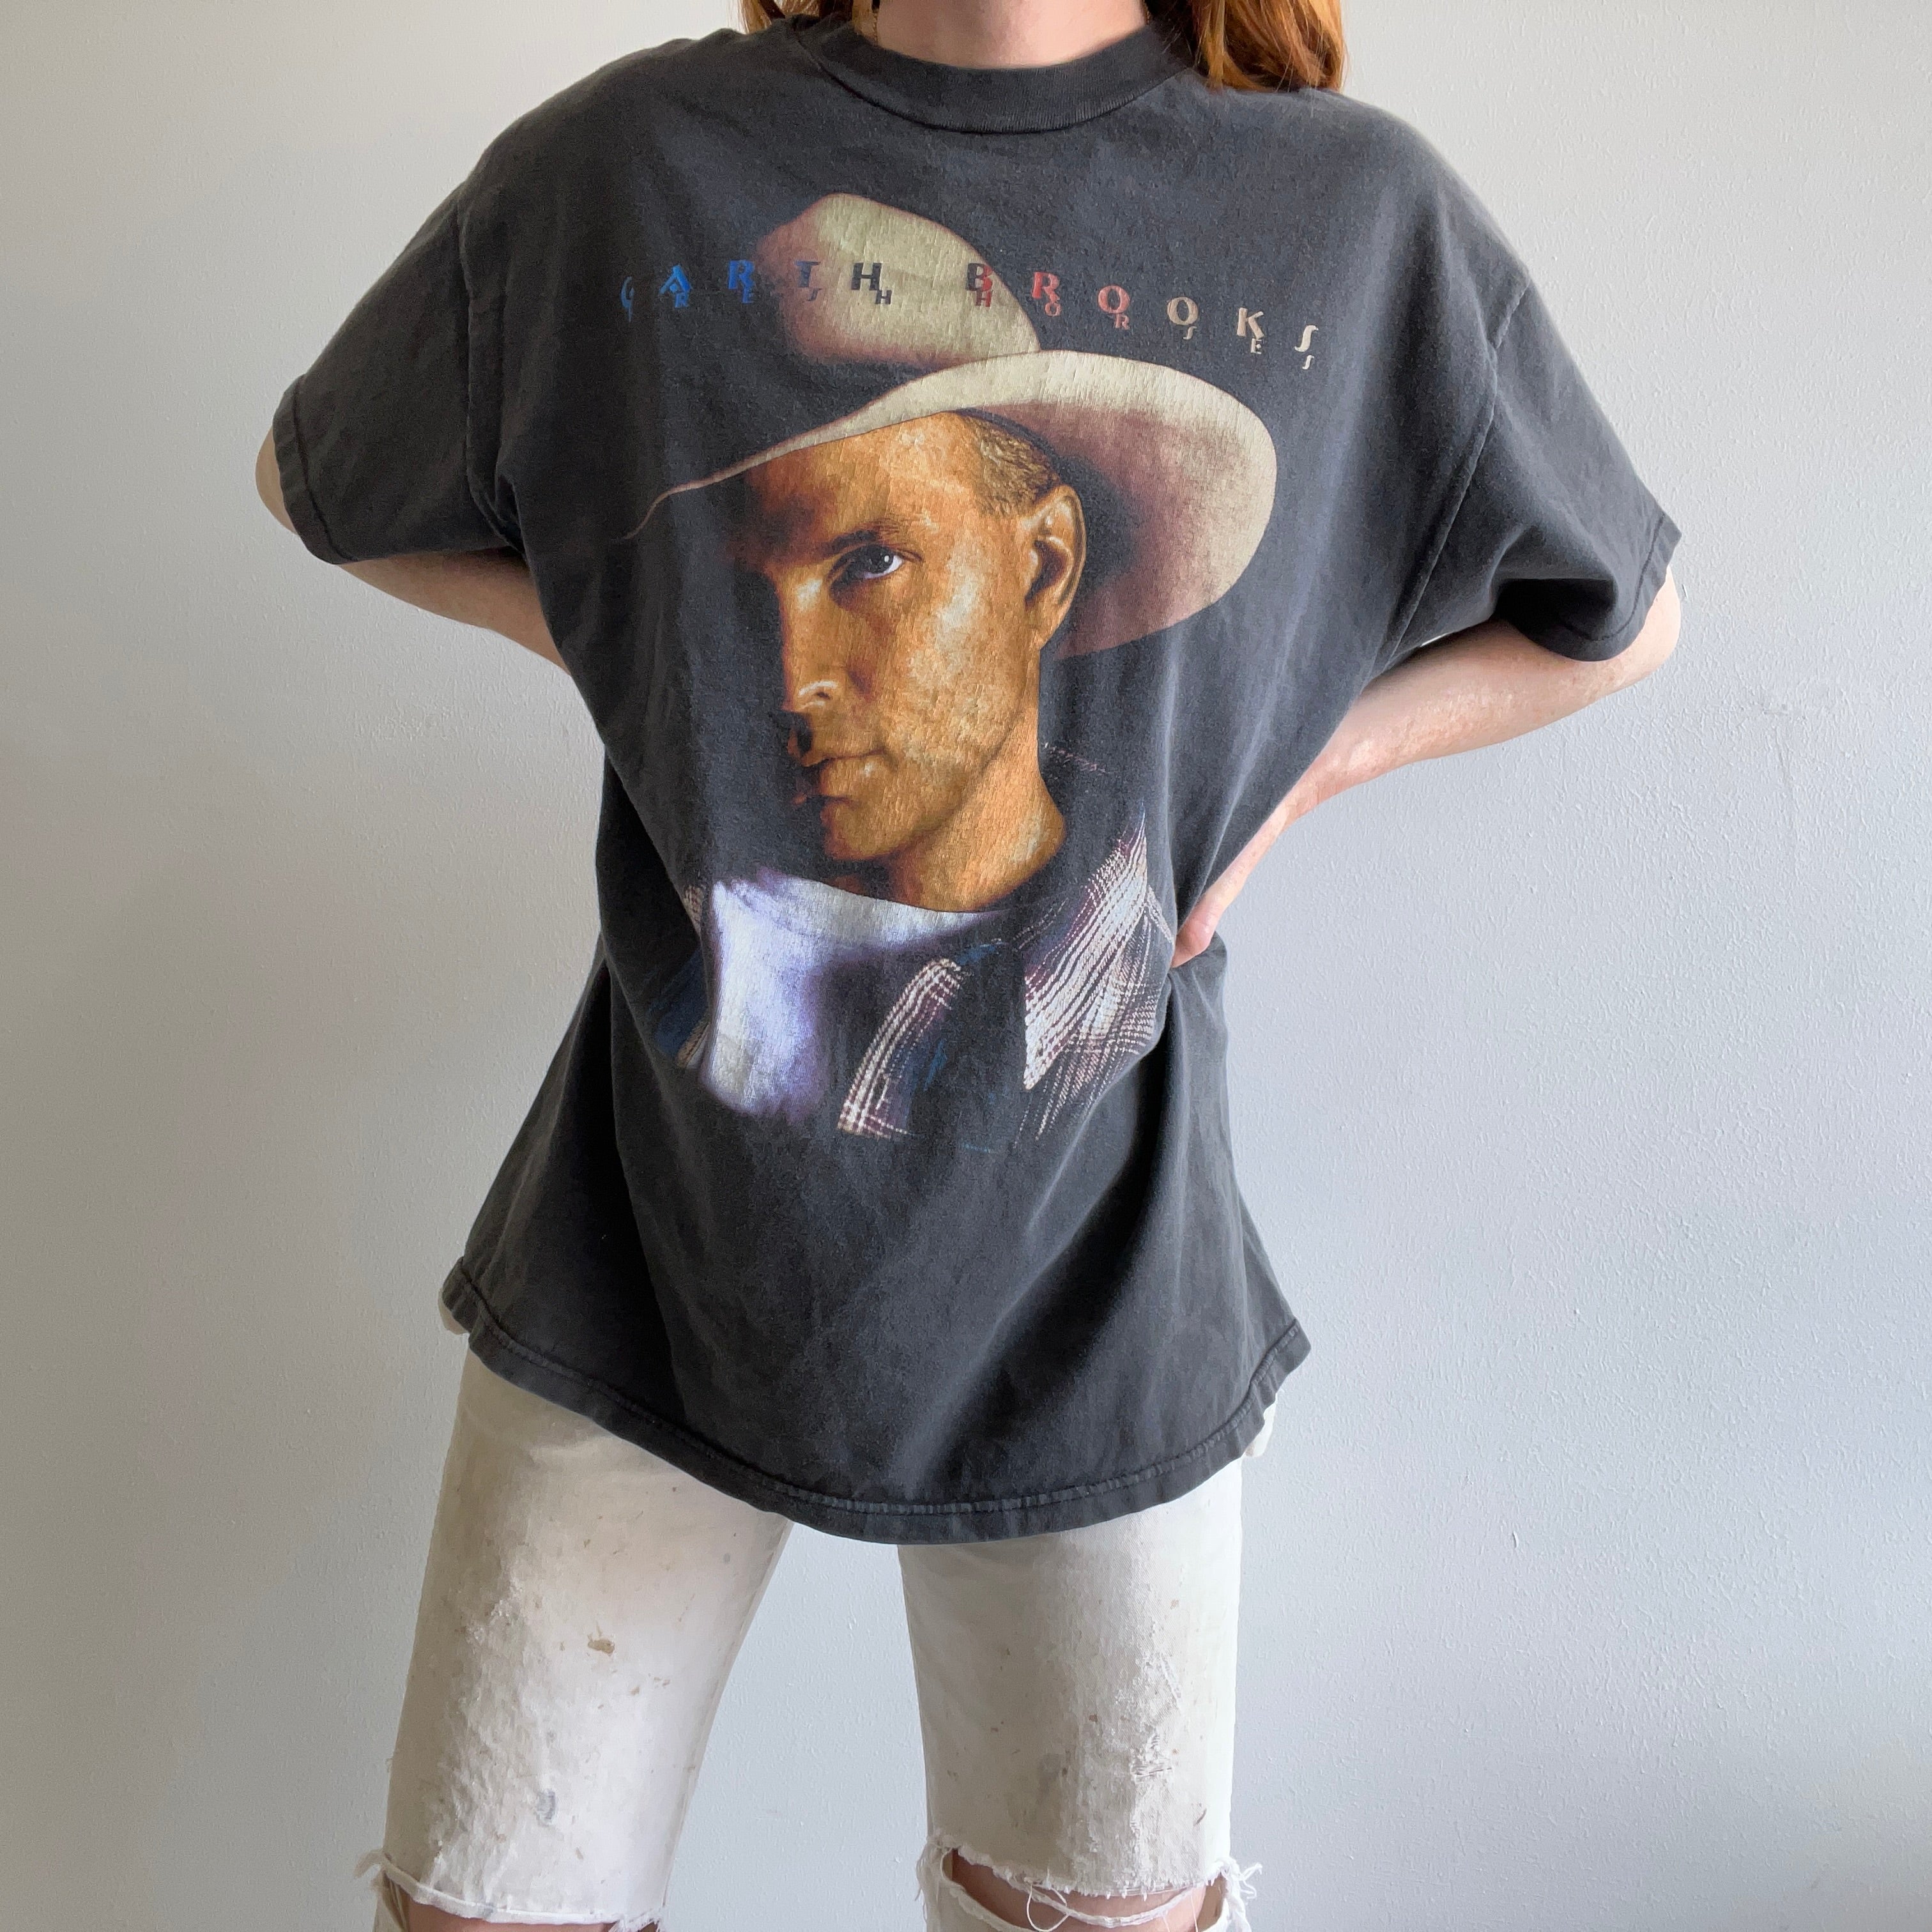 1996 Garth Brooks Giant Head Front and Back T-Shirt - Fresh Horses Tour